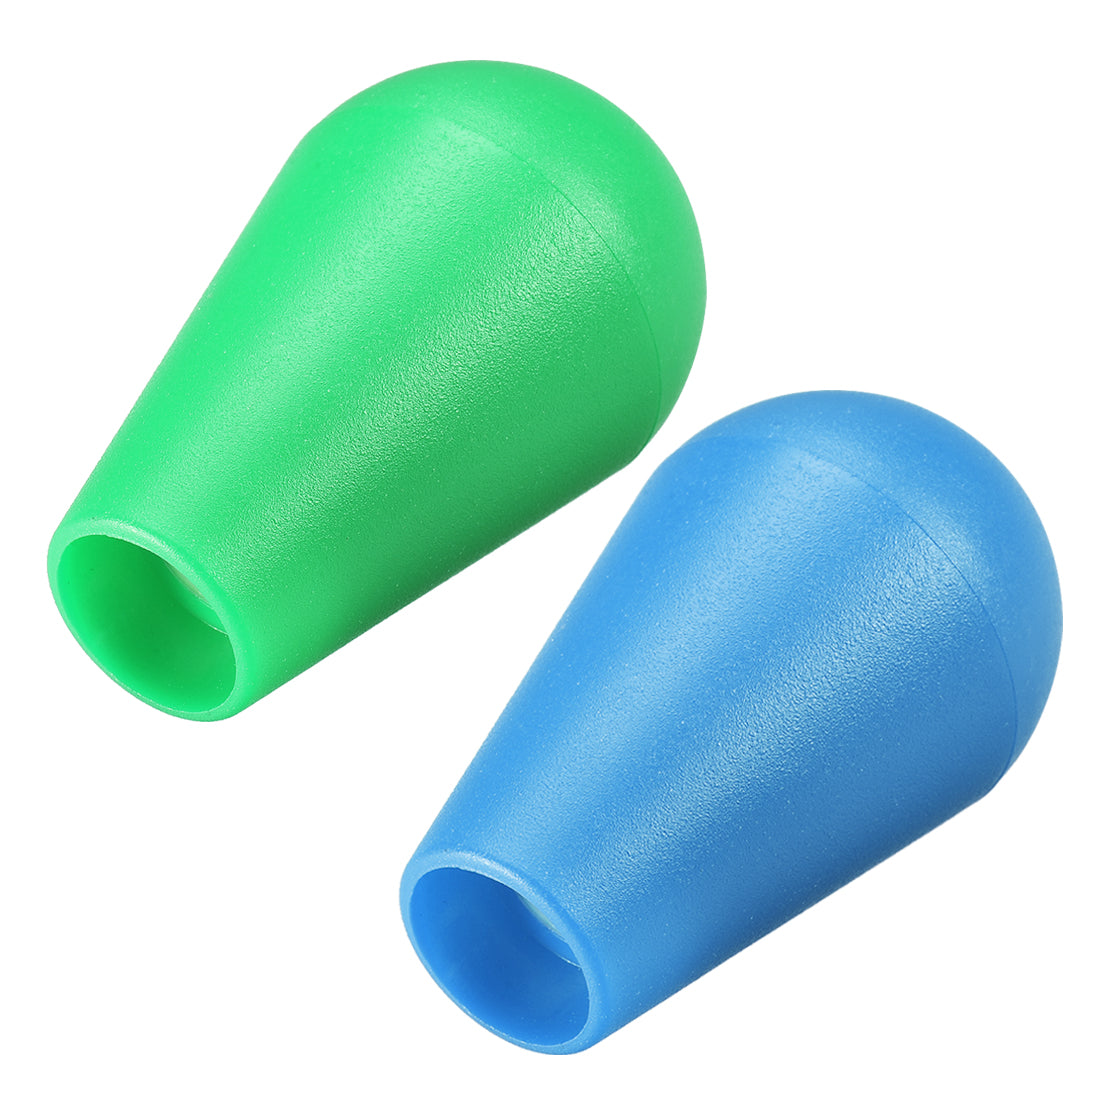 uxcell Uxcell Ellipse Oval Joystick Head Rocker Ball Top Handle American Type Arcade Game DIY Parts Replacement Green Blue 2Pcs